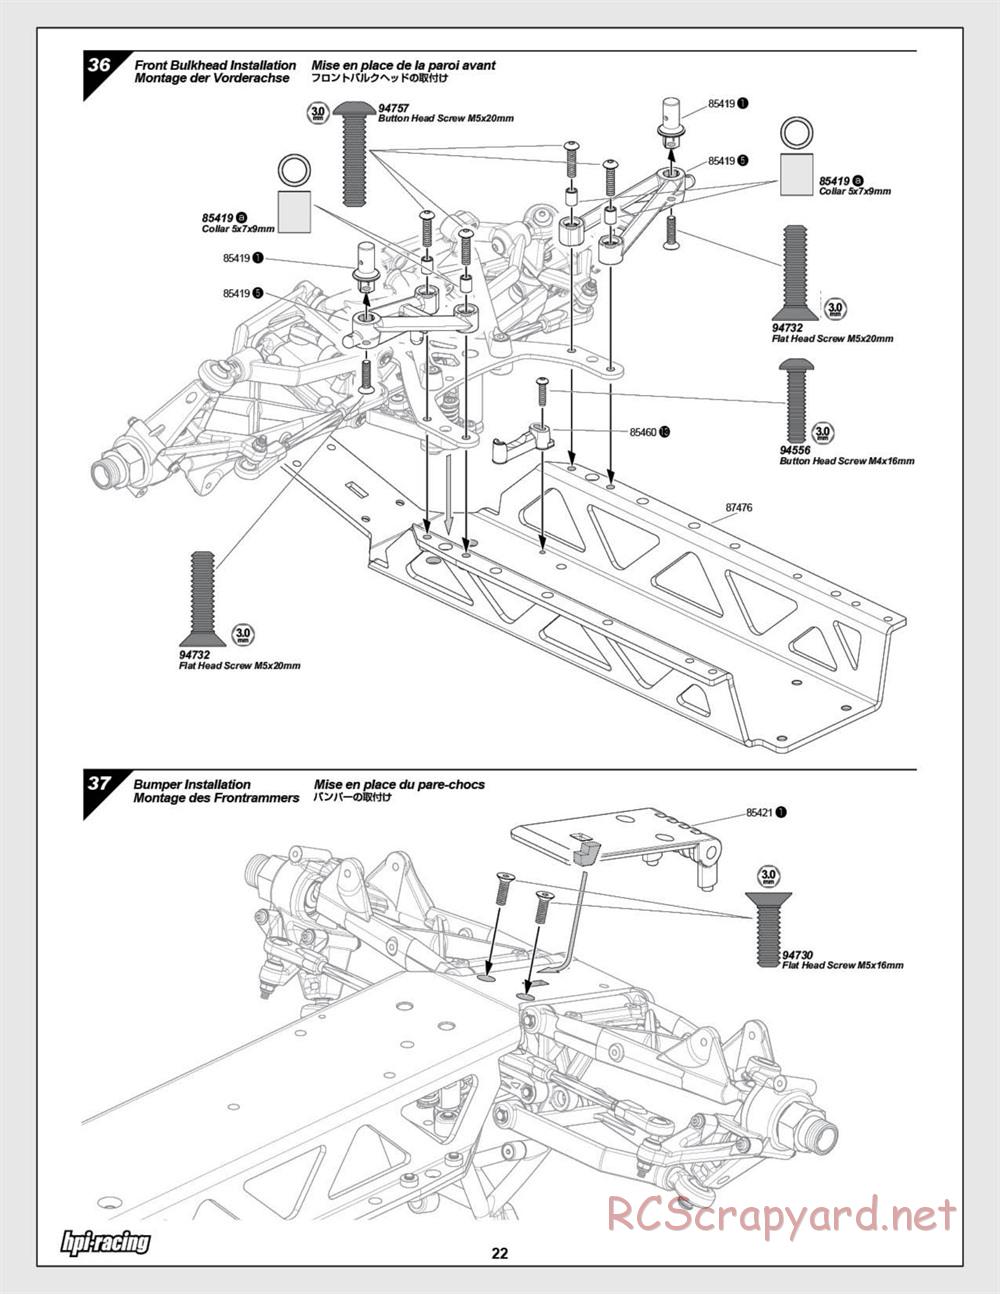 HPI - Baja 5SC SS - Exploded View - Page 22